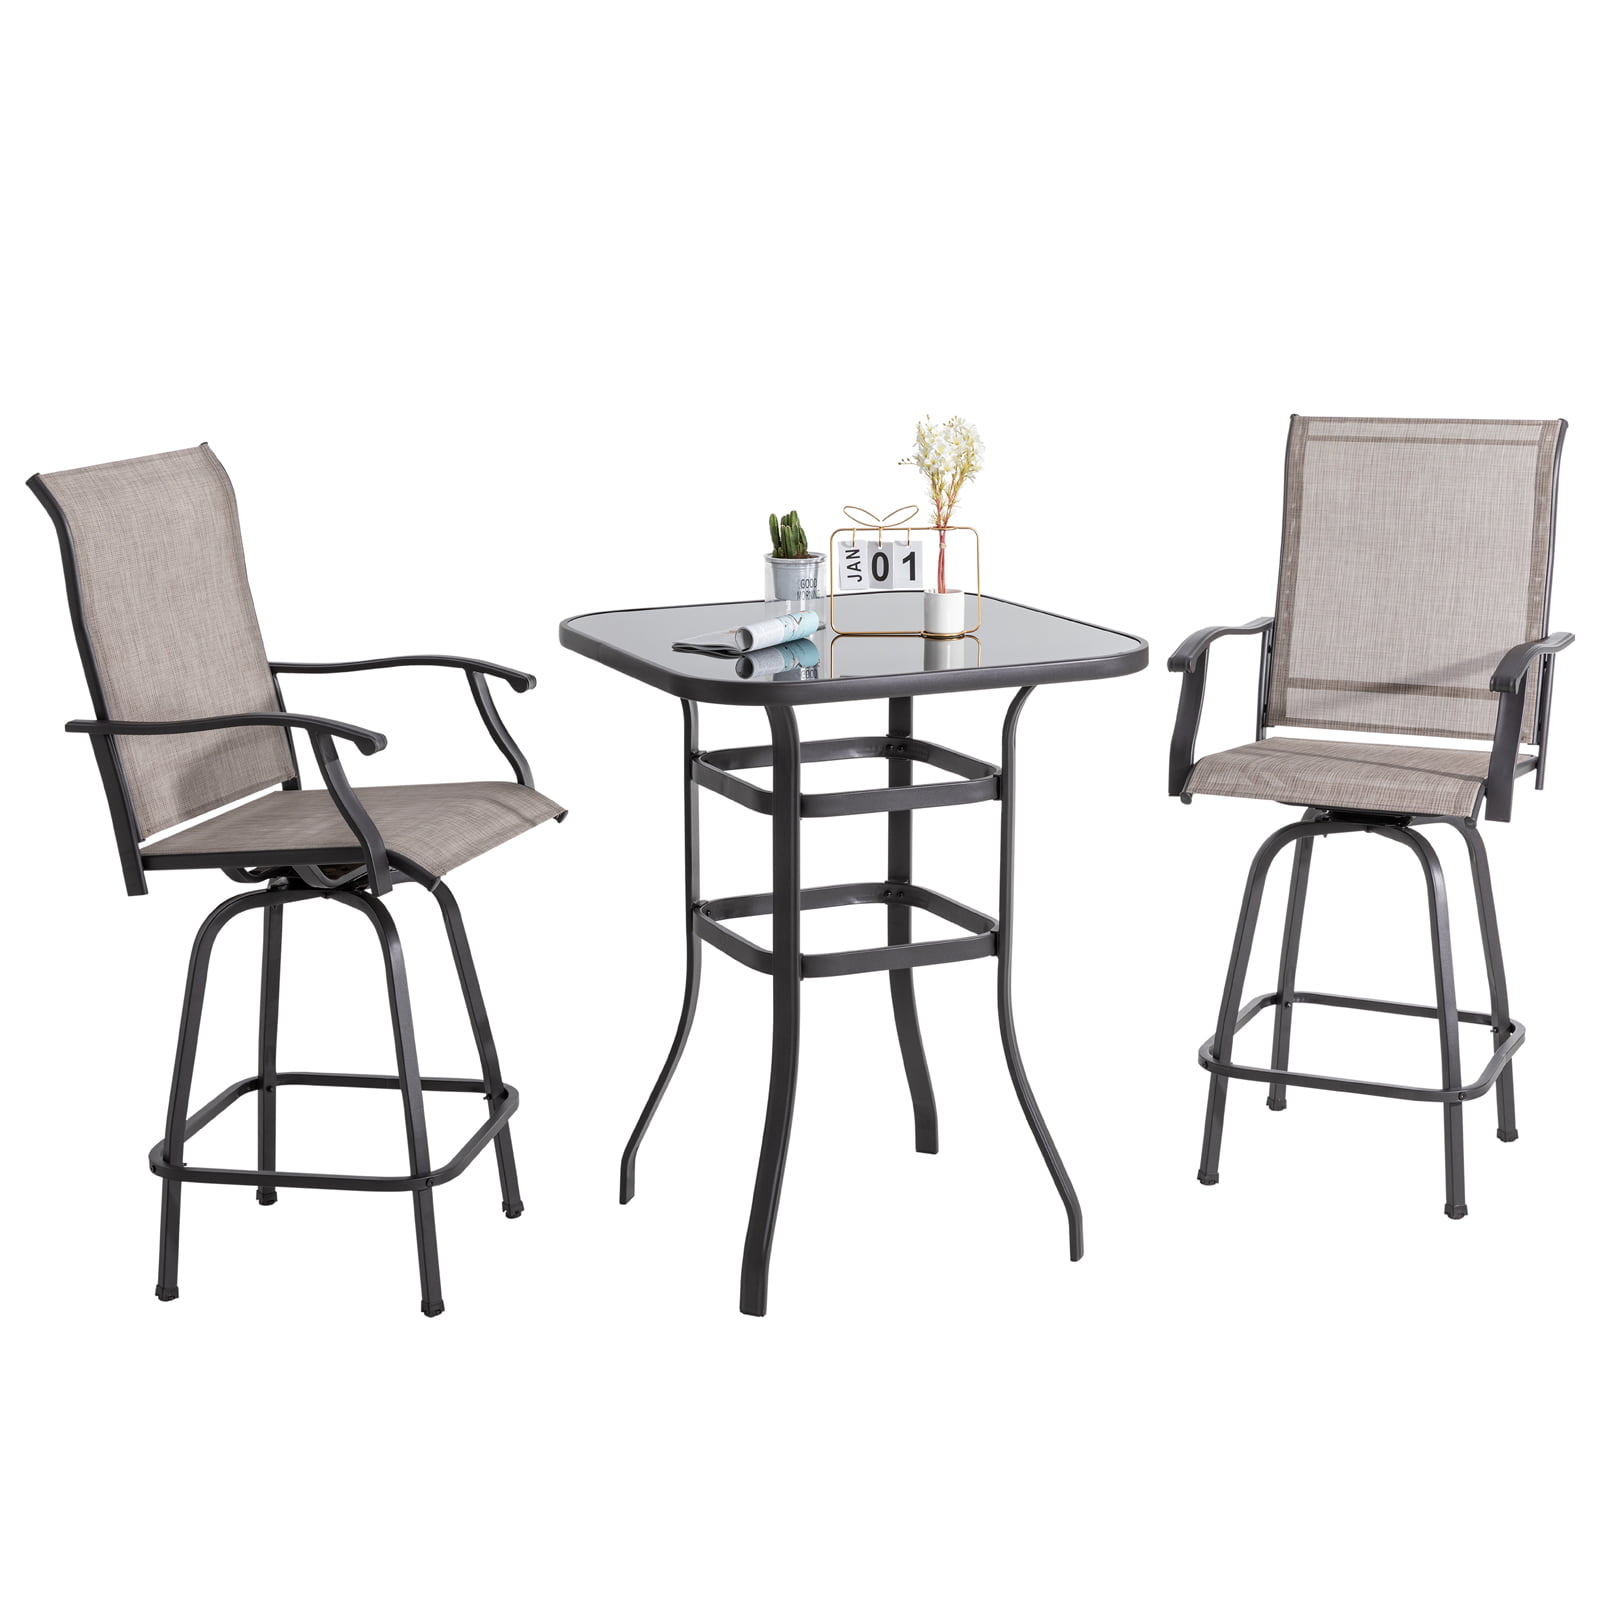 All Weather Mental Frame Textilene High Swivel Bar Stools Chair Set of 2 and High Glass Bar Table Vongrasig 3 Piece Patio Swivel Bar Set Outdoor High Top Bistro Set for Lawn Garden Taupe Balcony 